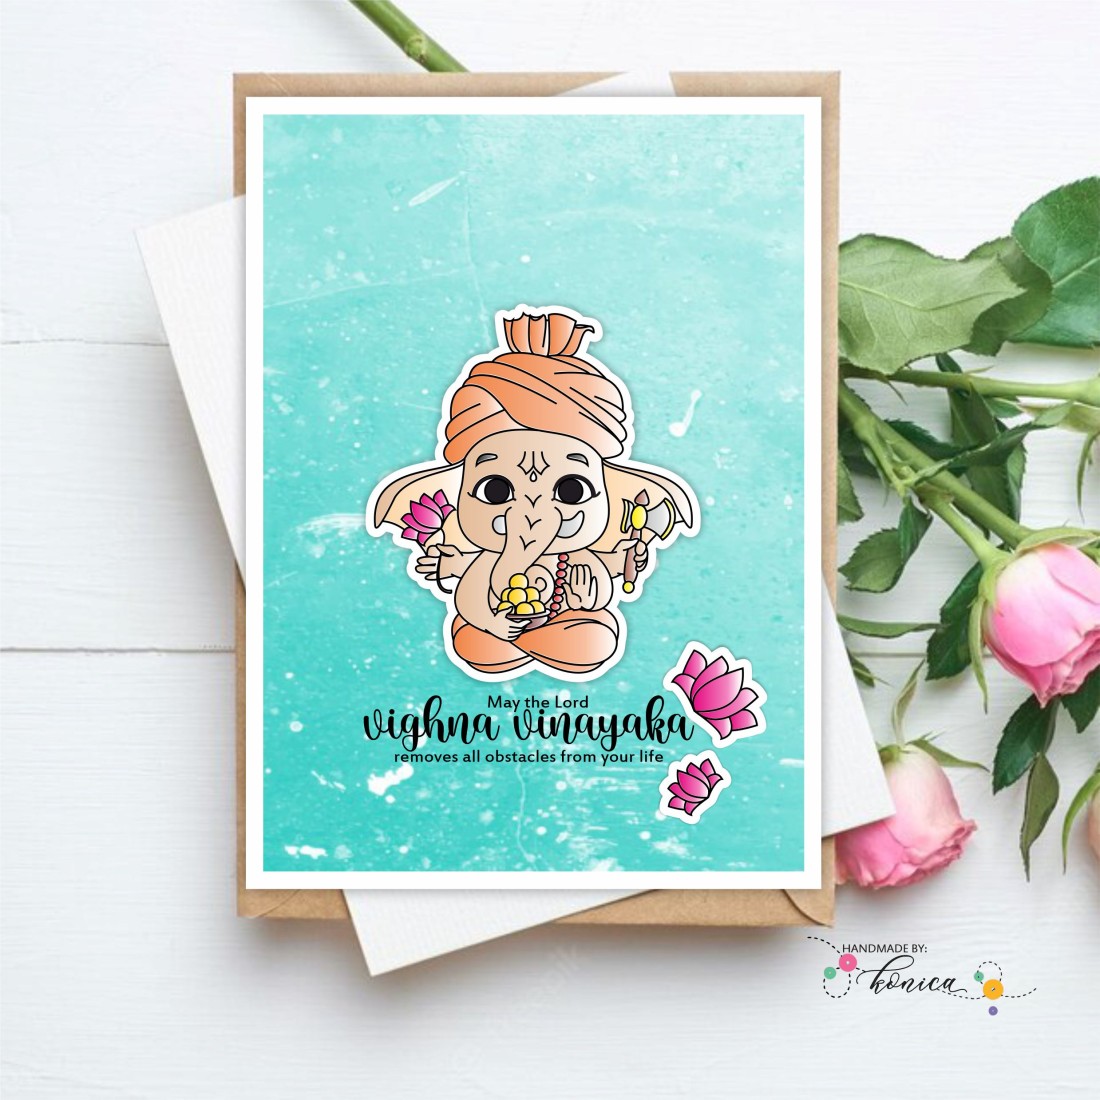 Craftyscrappers Stamps- GANESHA CHATURTHI